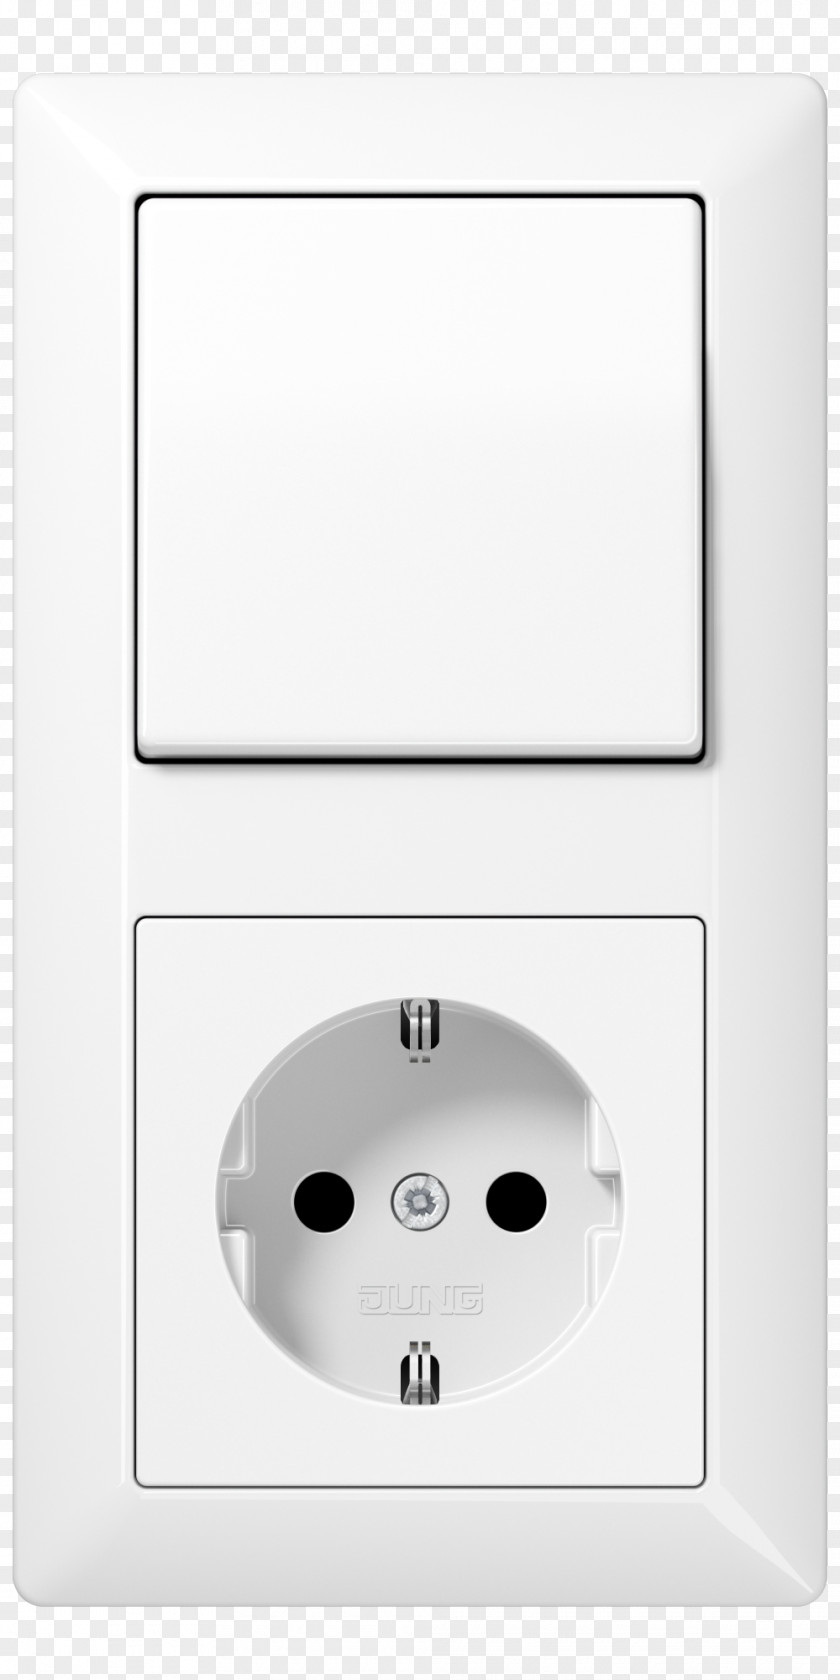 White Package Design AC Power Plugs And Sockets Jung Electrical Switches Berker Gira PNG